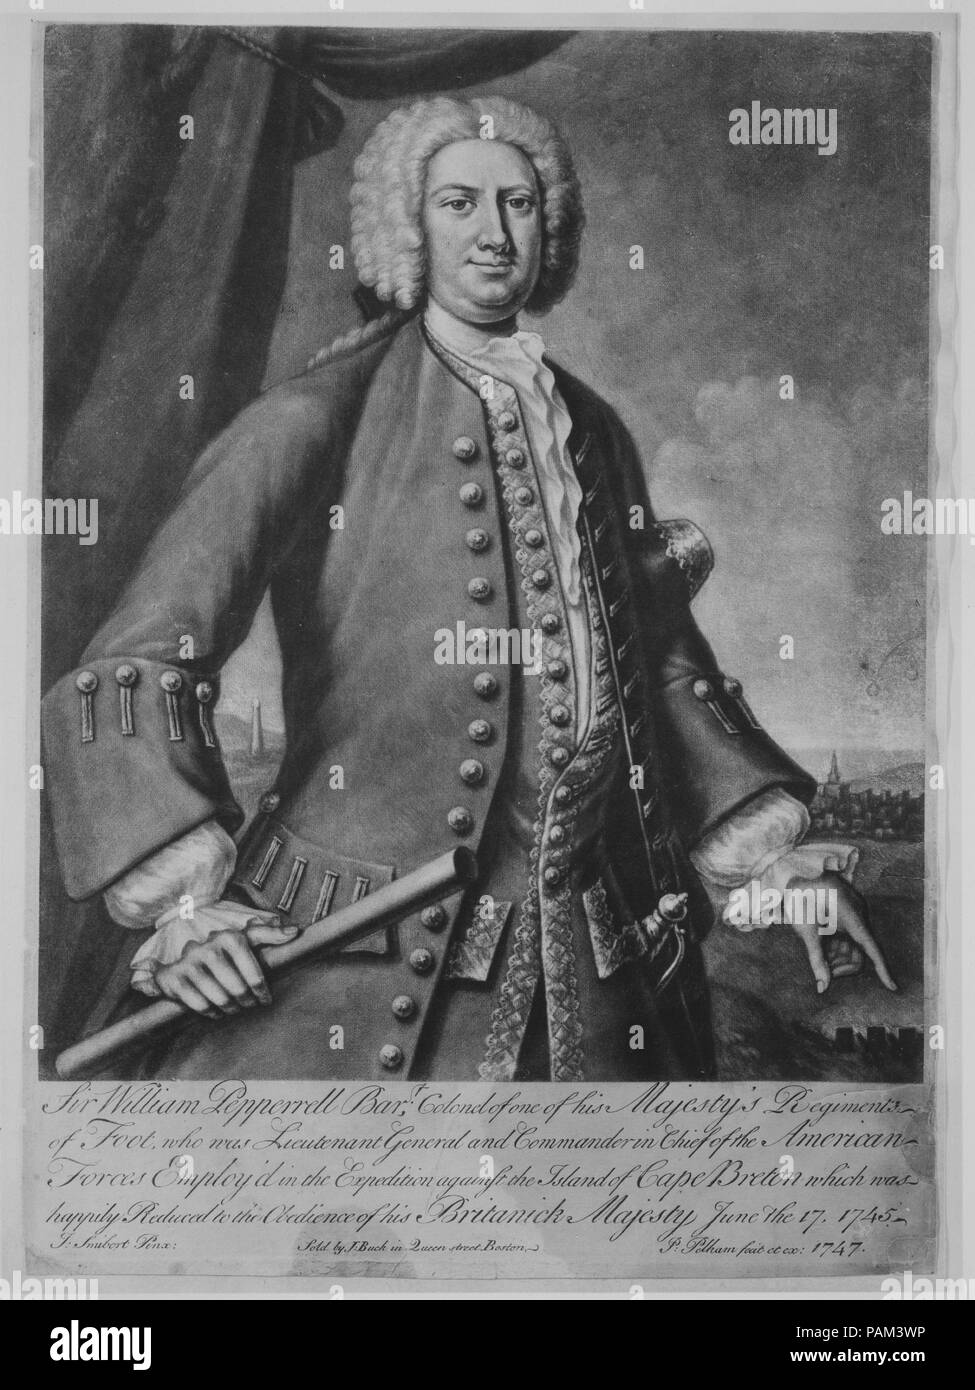 Sir William Pepperrell. Artist: Engraved and published by Peter Pelham (American (born England), London 1697-1751 Boston, Massachusetts); After John Smibert (American, Edinburgh, Scotland 1688-1751 Boston, Massachusetts). Dimensions: image: 11 3/16 x 9 3/4 in. (28.4 x 24.8 cm)  plate (trimmed at top): 13 13/16 x 9 7/8 in. (35.1 x 25.1 cm)  sheet: 13 15/16 x 10 1/16 in. (35.4 x 25.6 cm). Publisher: Sold by J. Buck (Boston, Massachusetts). Sitter: Sir William Pepperrell, 1st Baronet (American, KIttery, Maine 1696-1759 Kittery, Maine). Date: 1747. Museum: Metropolitan Museum of Art, New York, USA Stock Photo